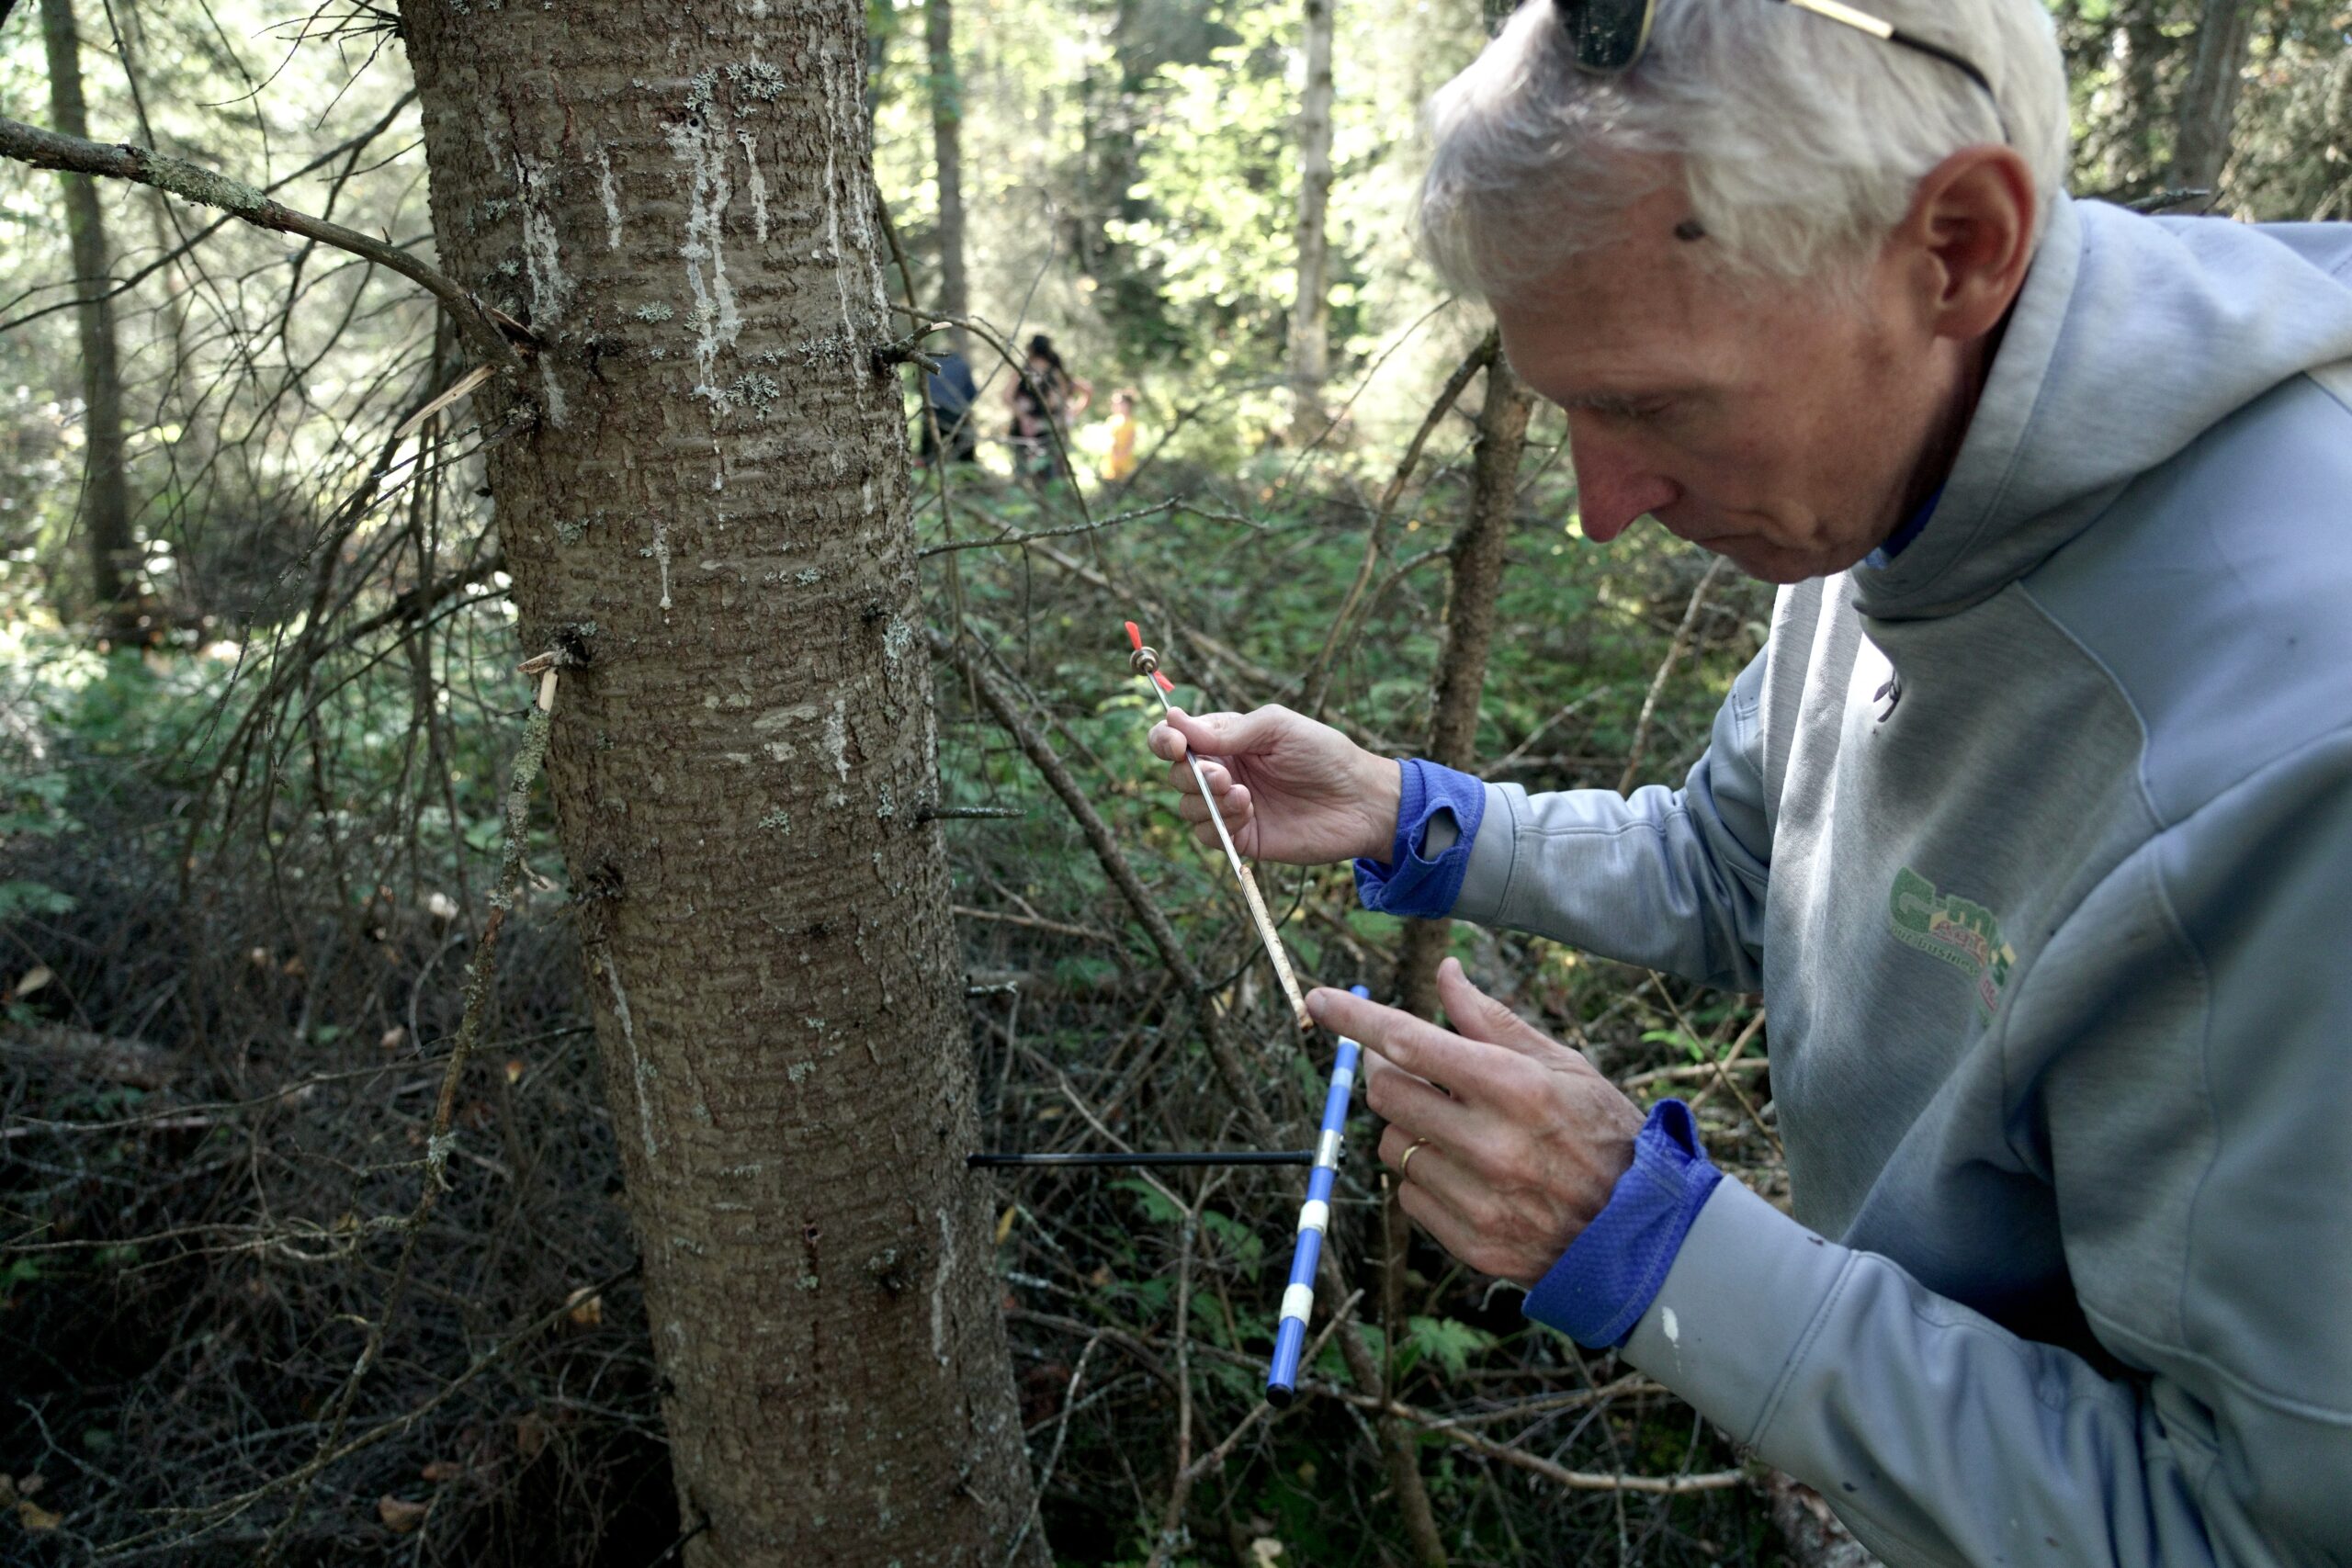 A scientist examines a core sample taken from a tree.